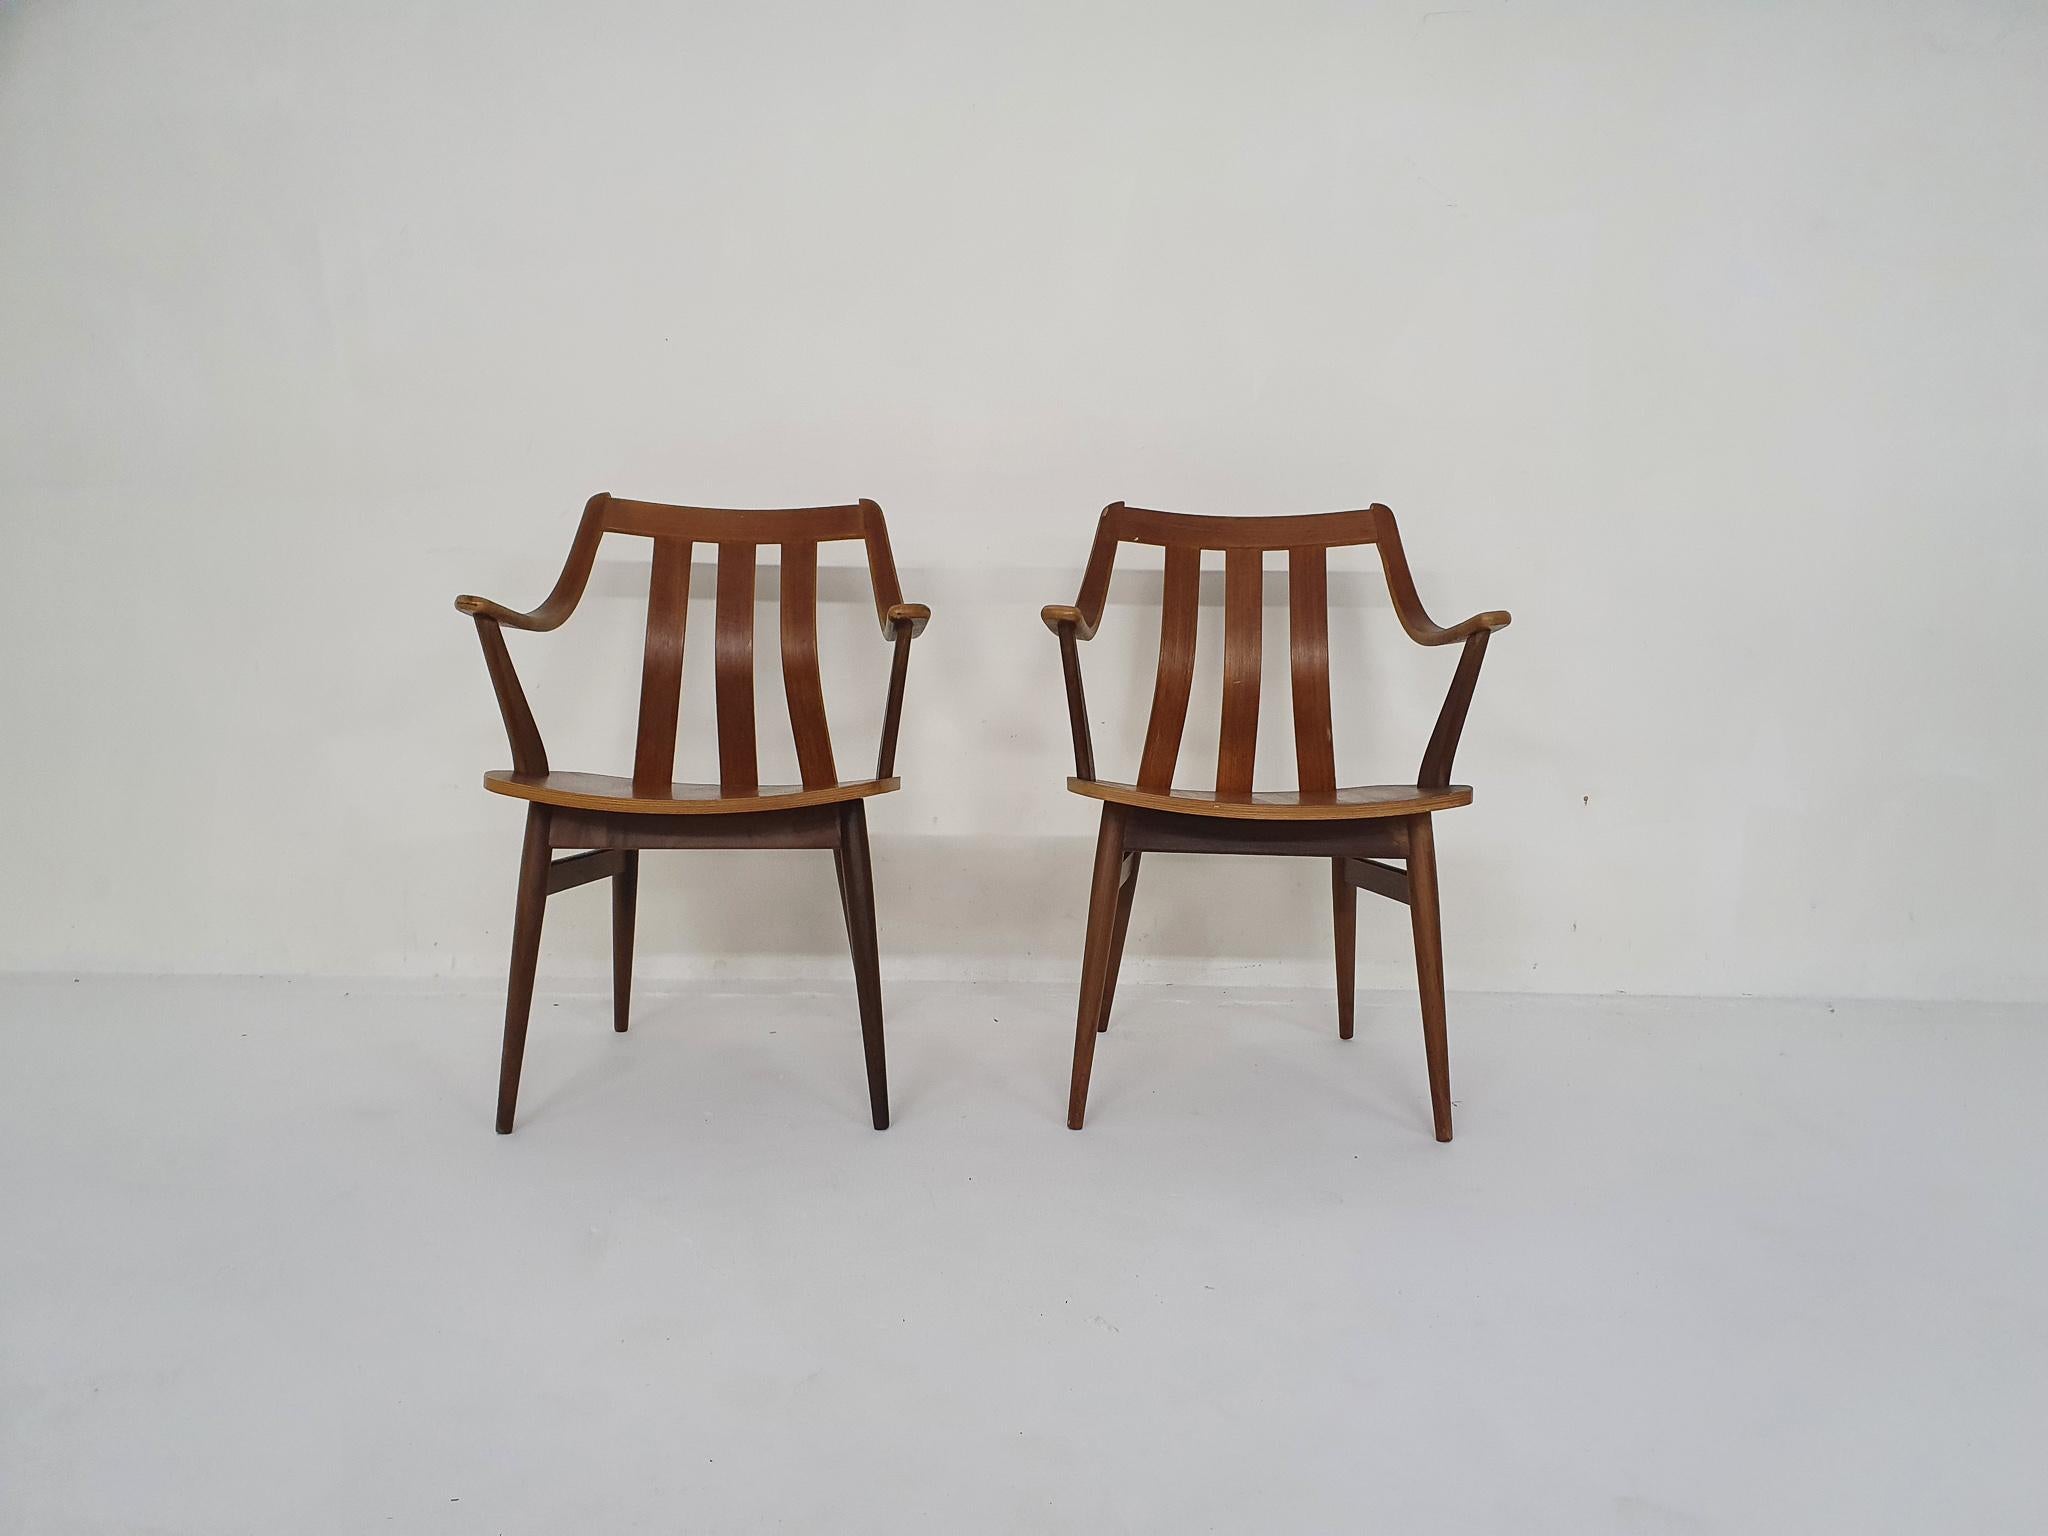 Teak dining chairs with arm rests.